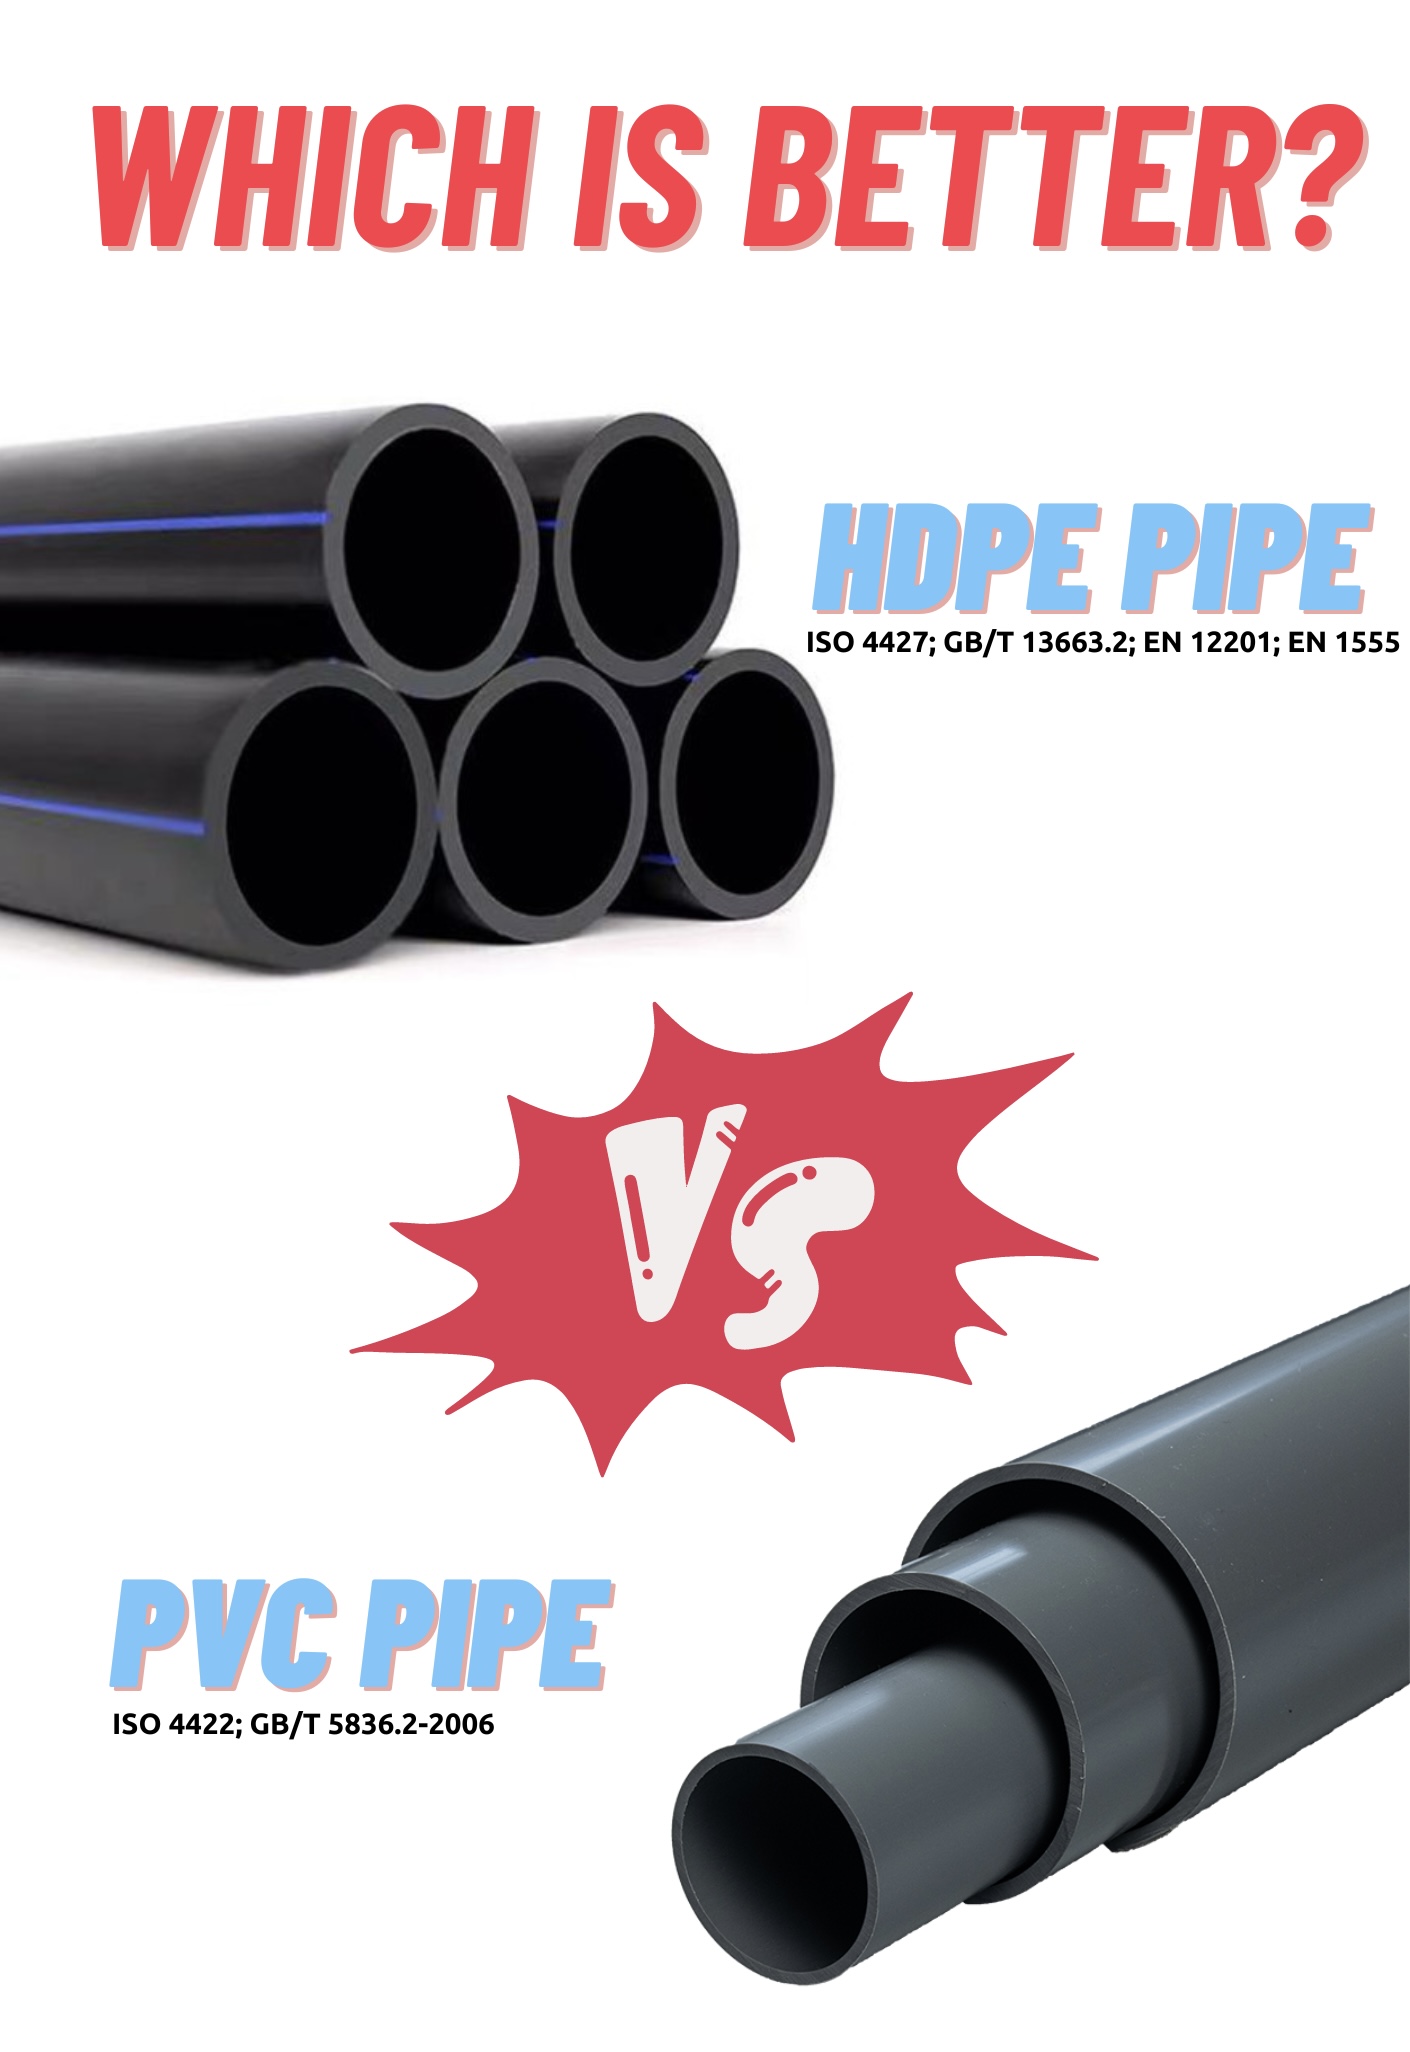 Which is better HDPE or PVC?